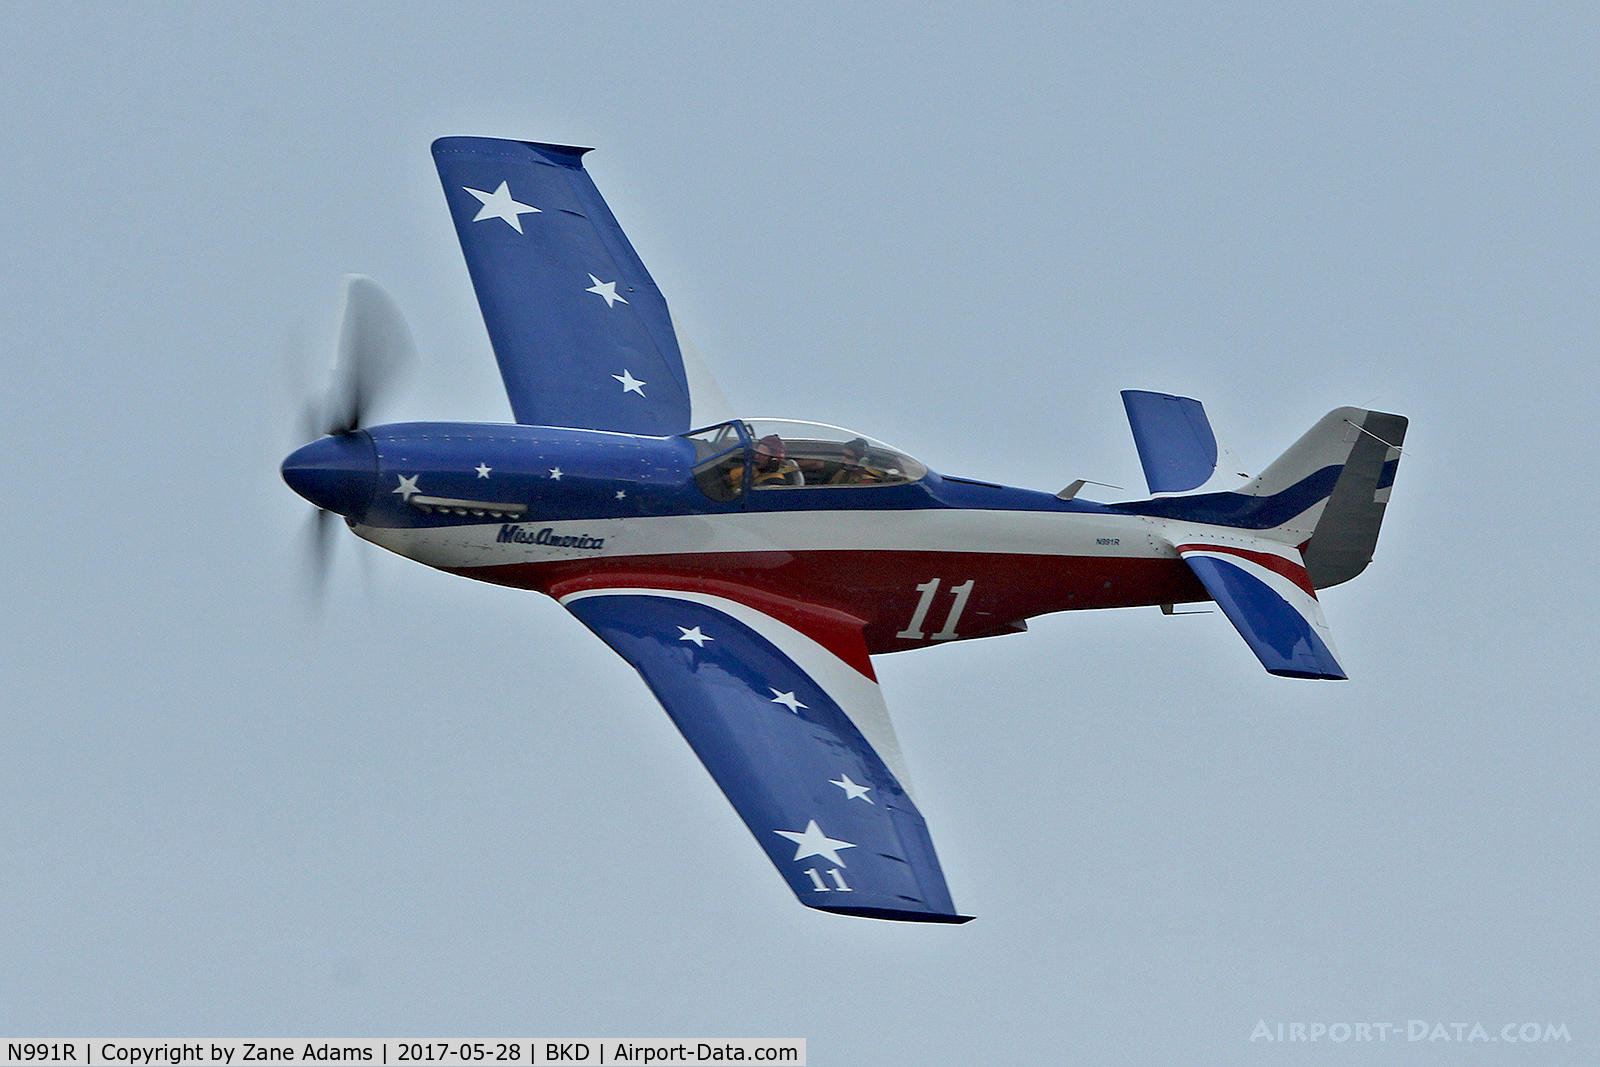 N991R, 1993 North American P-51D Mustang C/N 122-41076, At the 2017 Breckenridge Warbird Show